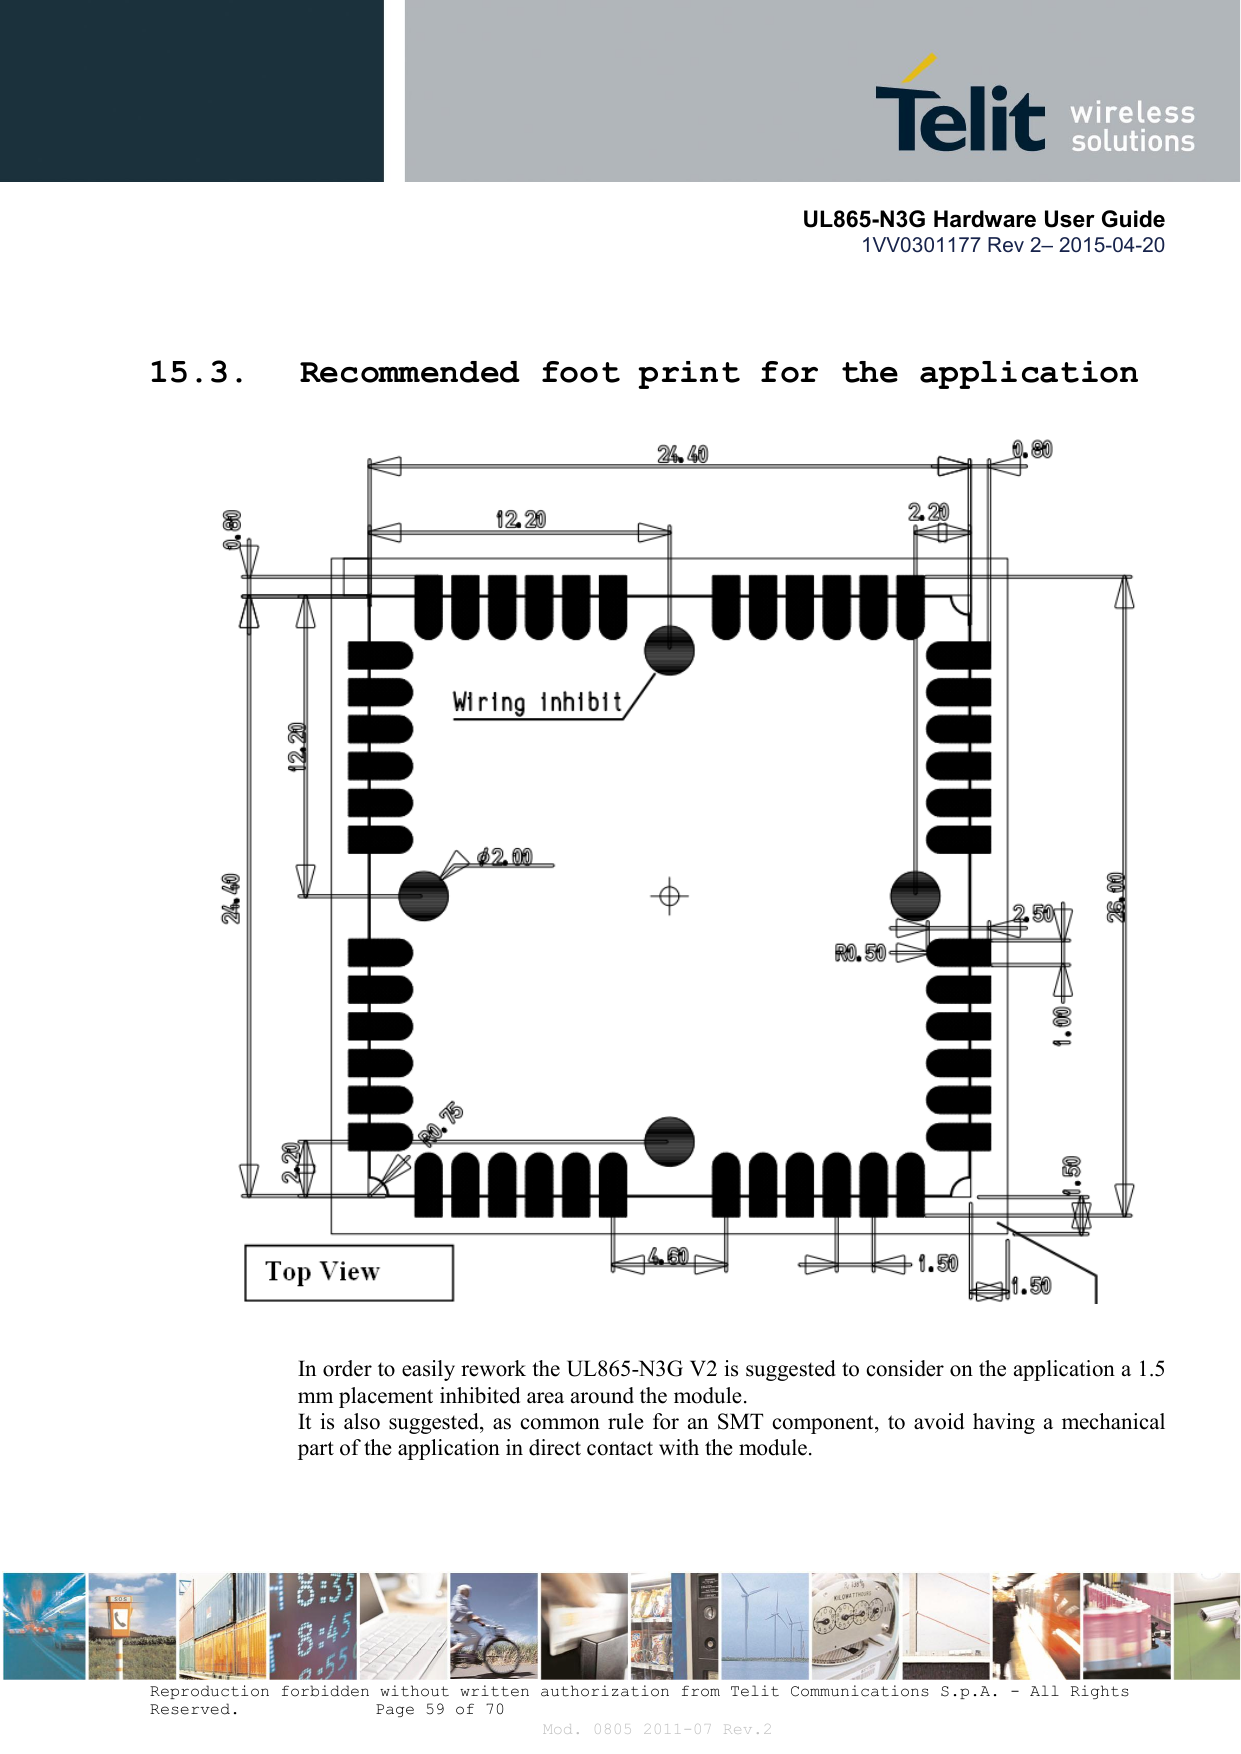       UL865-N3G Hardware User Guide 1VV0301177 Rev 2– 2015-04-20  Reproduction forbidden without written authorization from Telit Communications S.p.A. - All Rights Reserved.    Page 59 of 70 Mod. 0805 2011-07 Rev.2  15.3. Recommended foot print for the application    In order to easily rework the UL865-N3G V2 is suggested to consider on the application a 1.5 mm placement inhibited area around the module. It is  also suggested, as common rule for  an SMT component, to  avoid having a mechanical part of the application in direct contact with the module.    